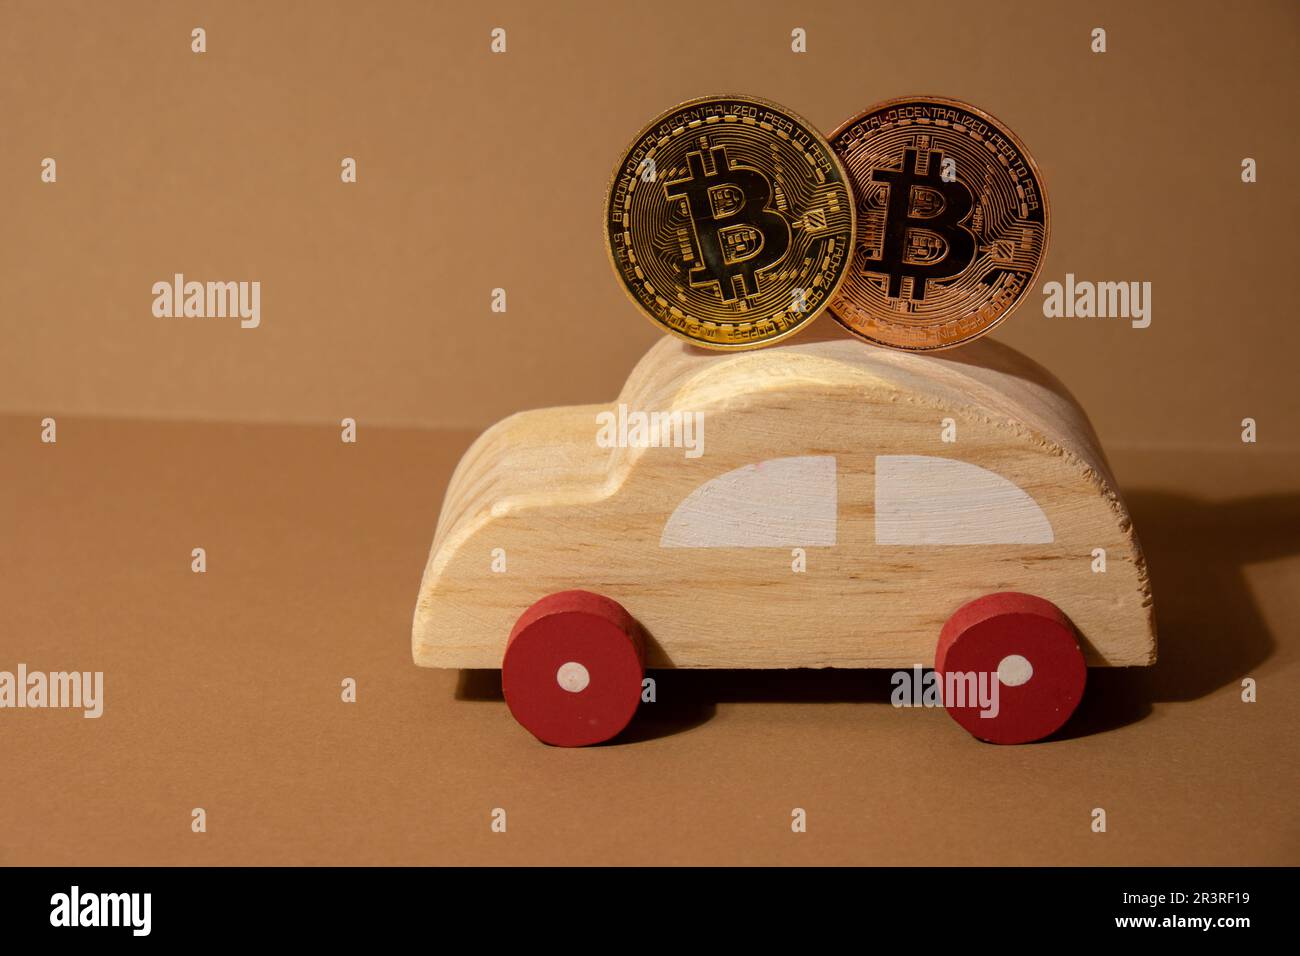 Bitcoin gold coin with wooden toy car. Saving and manage money for transport car loan mining trading concept. Automotive transportation industry merge with technology exchange financial market can pay money to seller online in blockchain. BTC Cryptocurrency or crypto digital payment system. Digital coin money farm in digital cyberspace Stock Photo